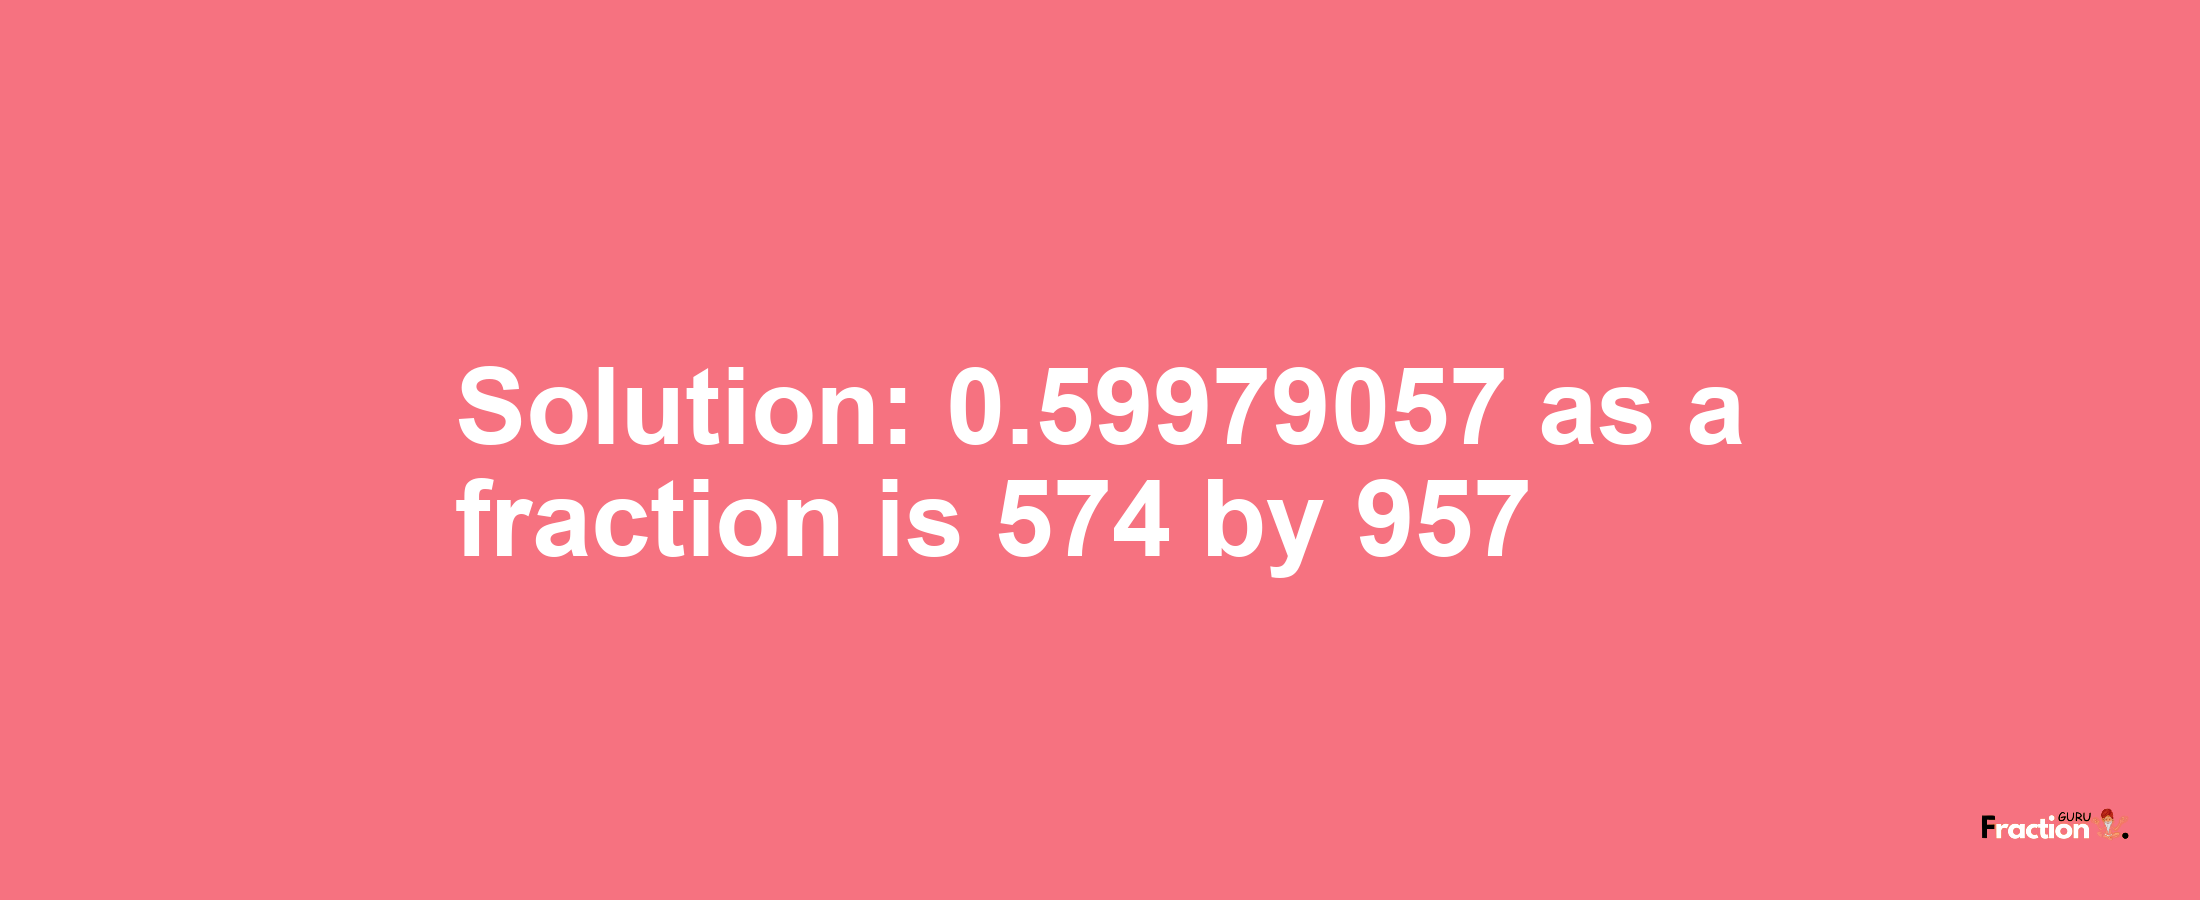 Solution:0.59979057 as a fraction is 574/957